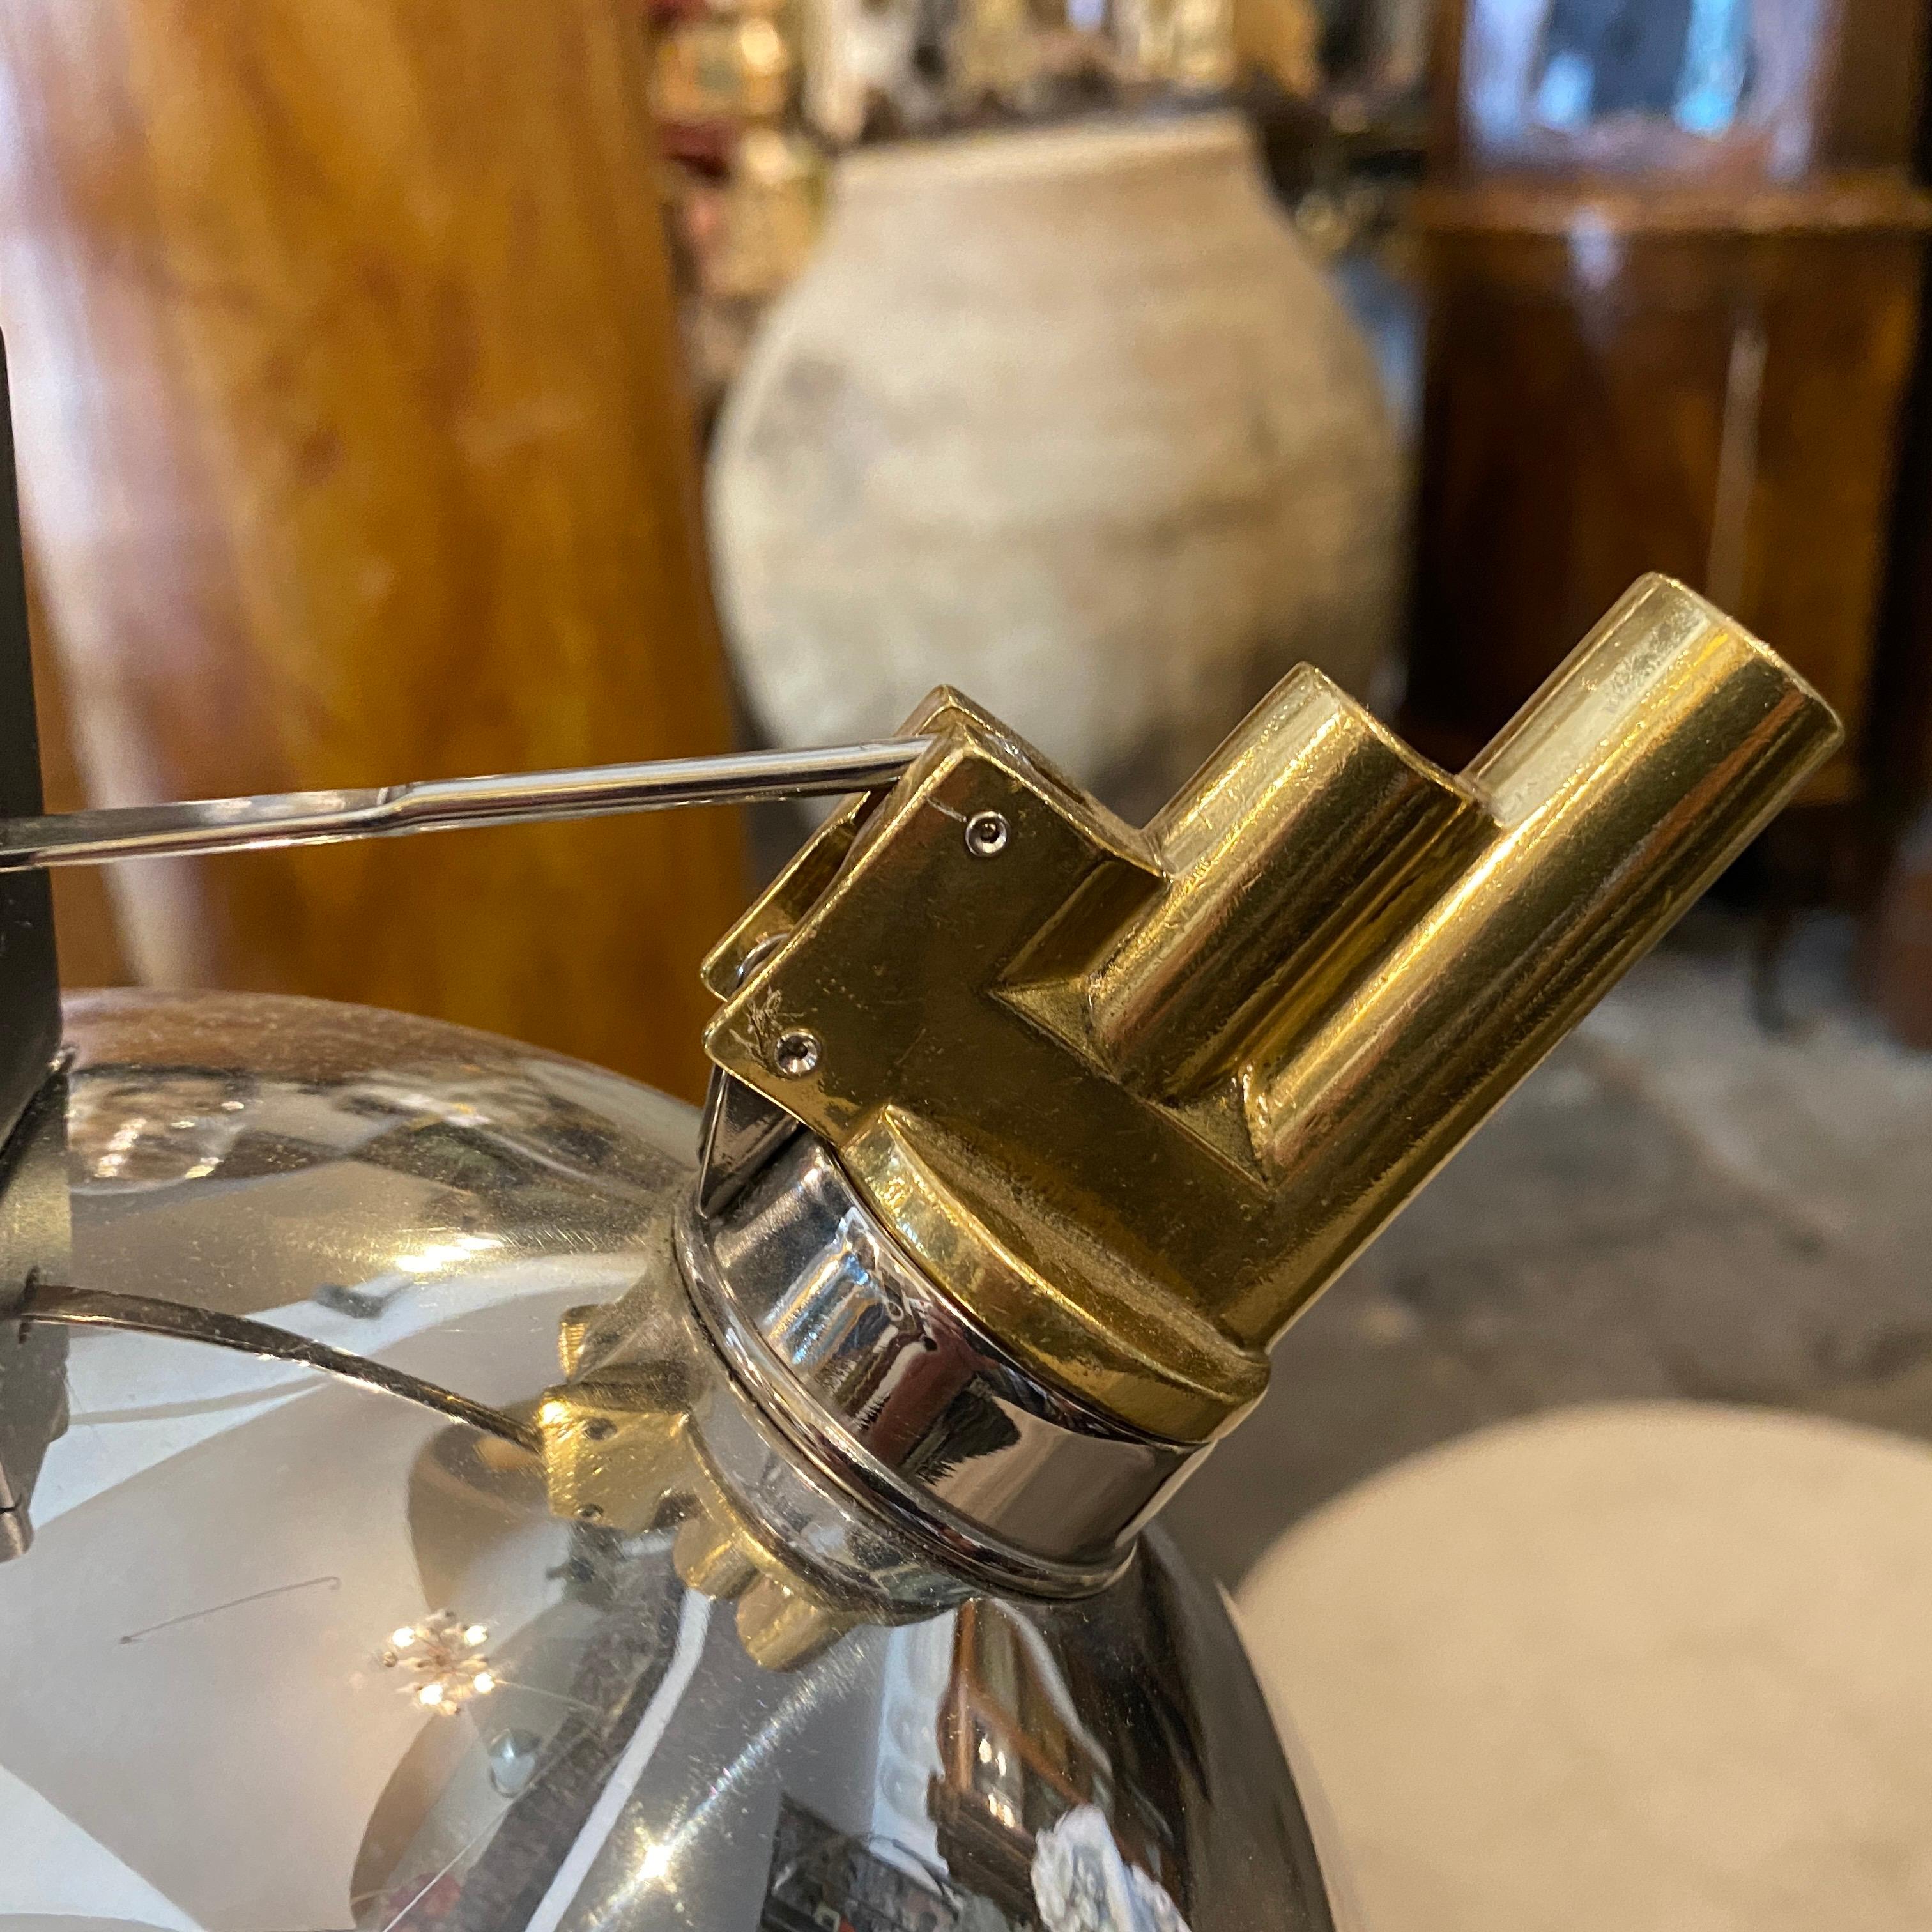 The Alessi kettle designed by Richard Sapper is a multi-sensory object, it has a melodic brass whistle with an unusual shape, consisting of two small pipes that reproduce musical notes E and B.